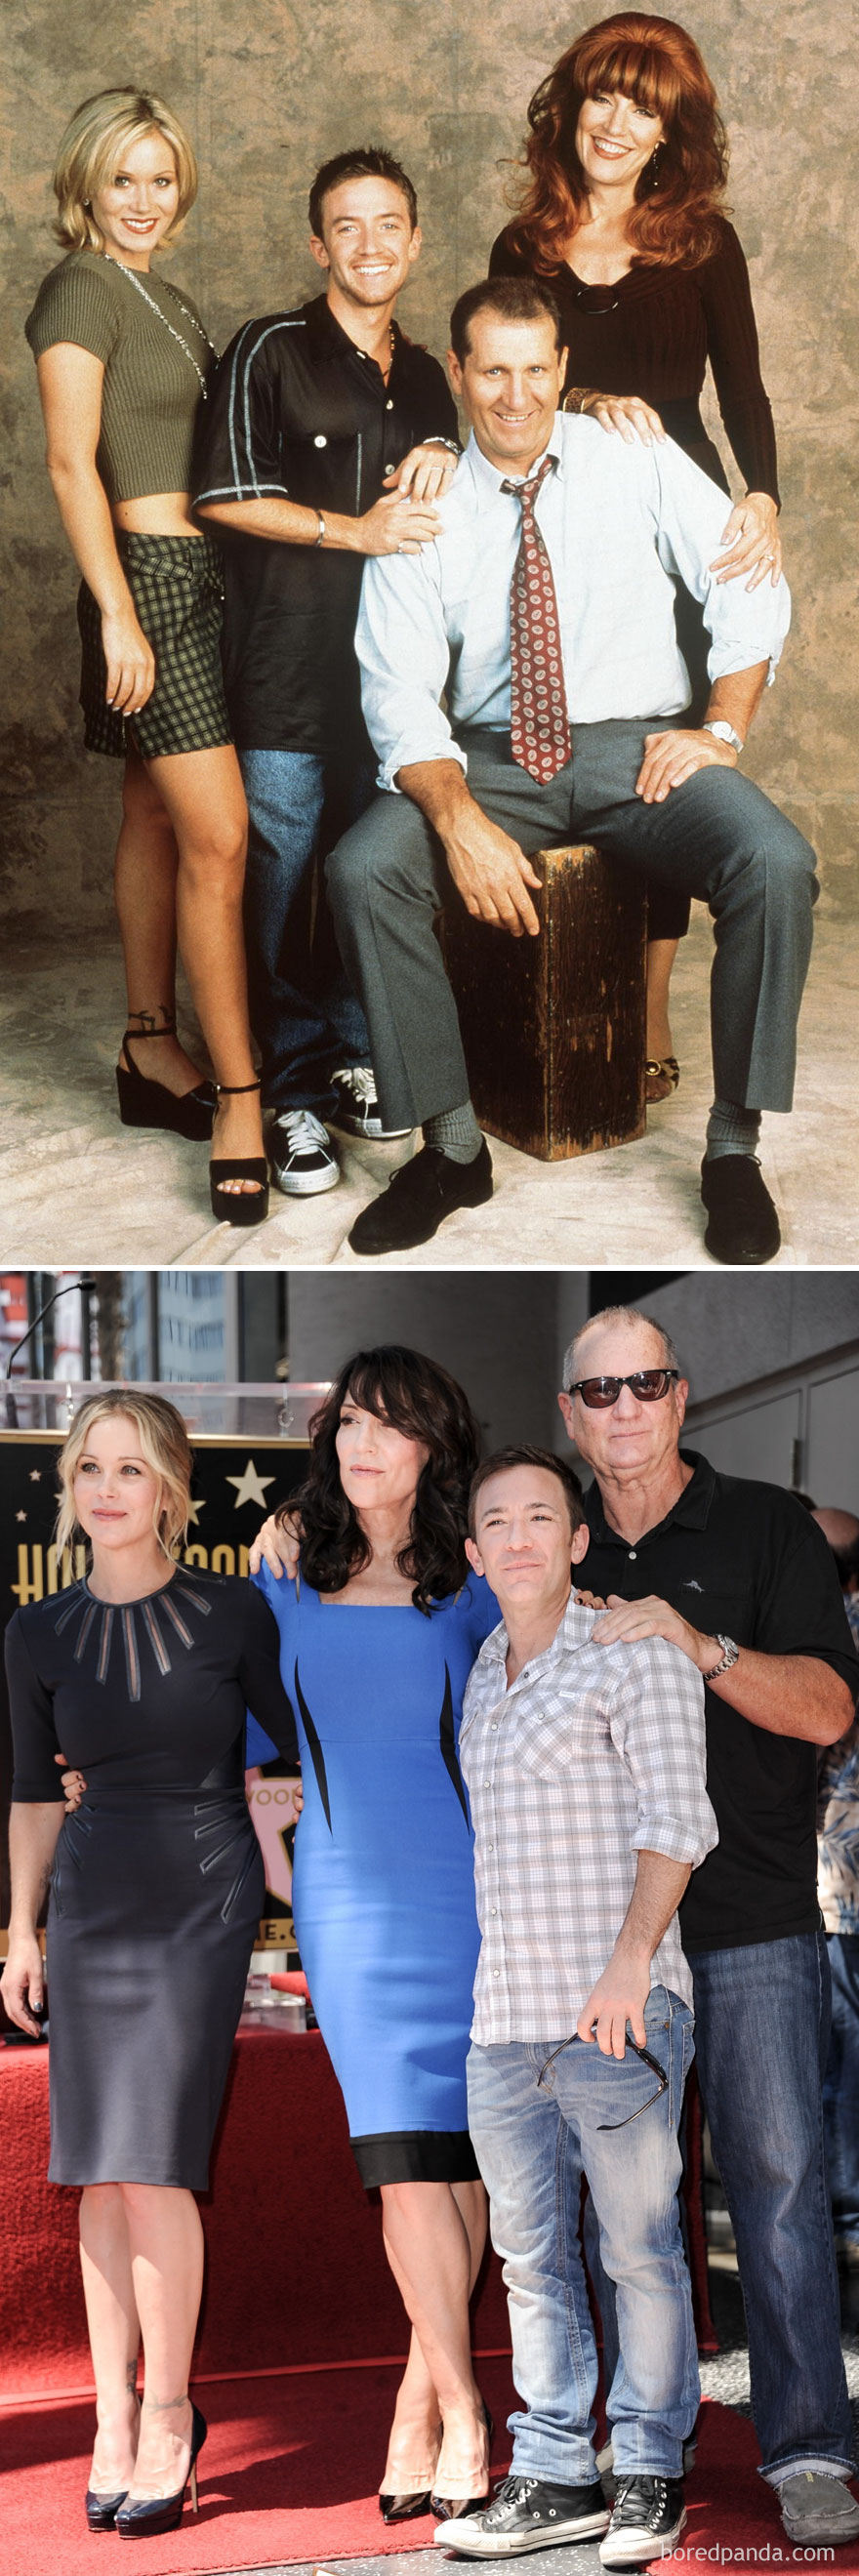 Married With Children 1987 Vs. 2014